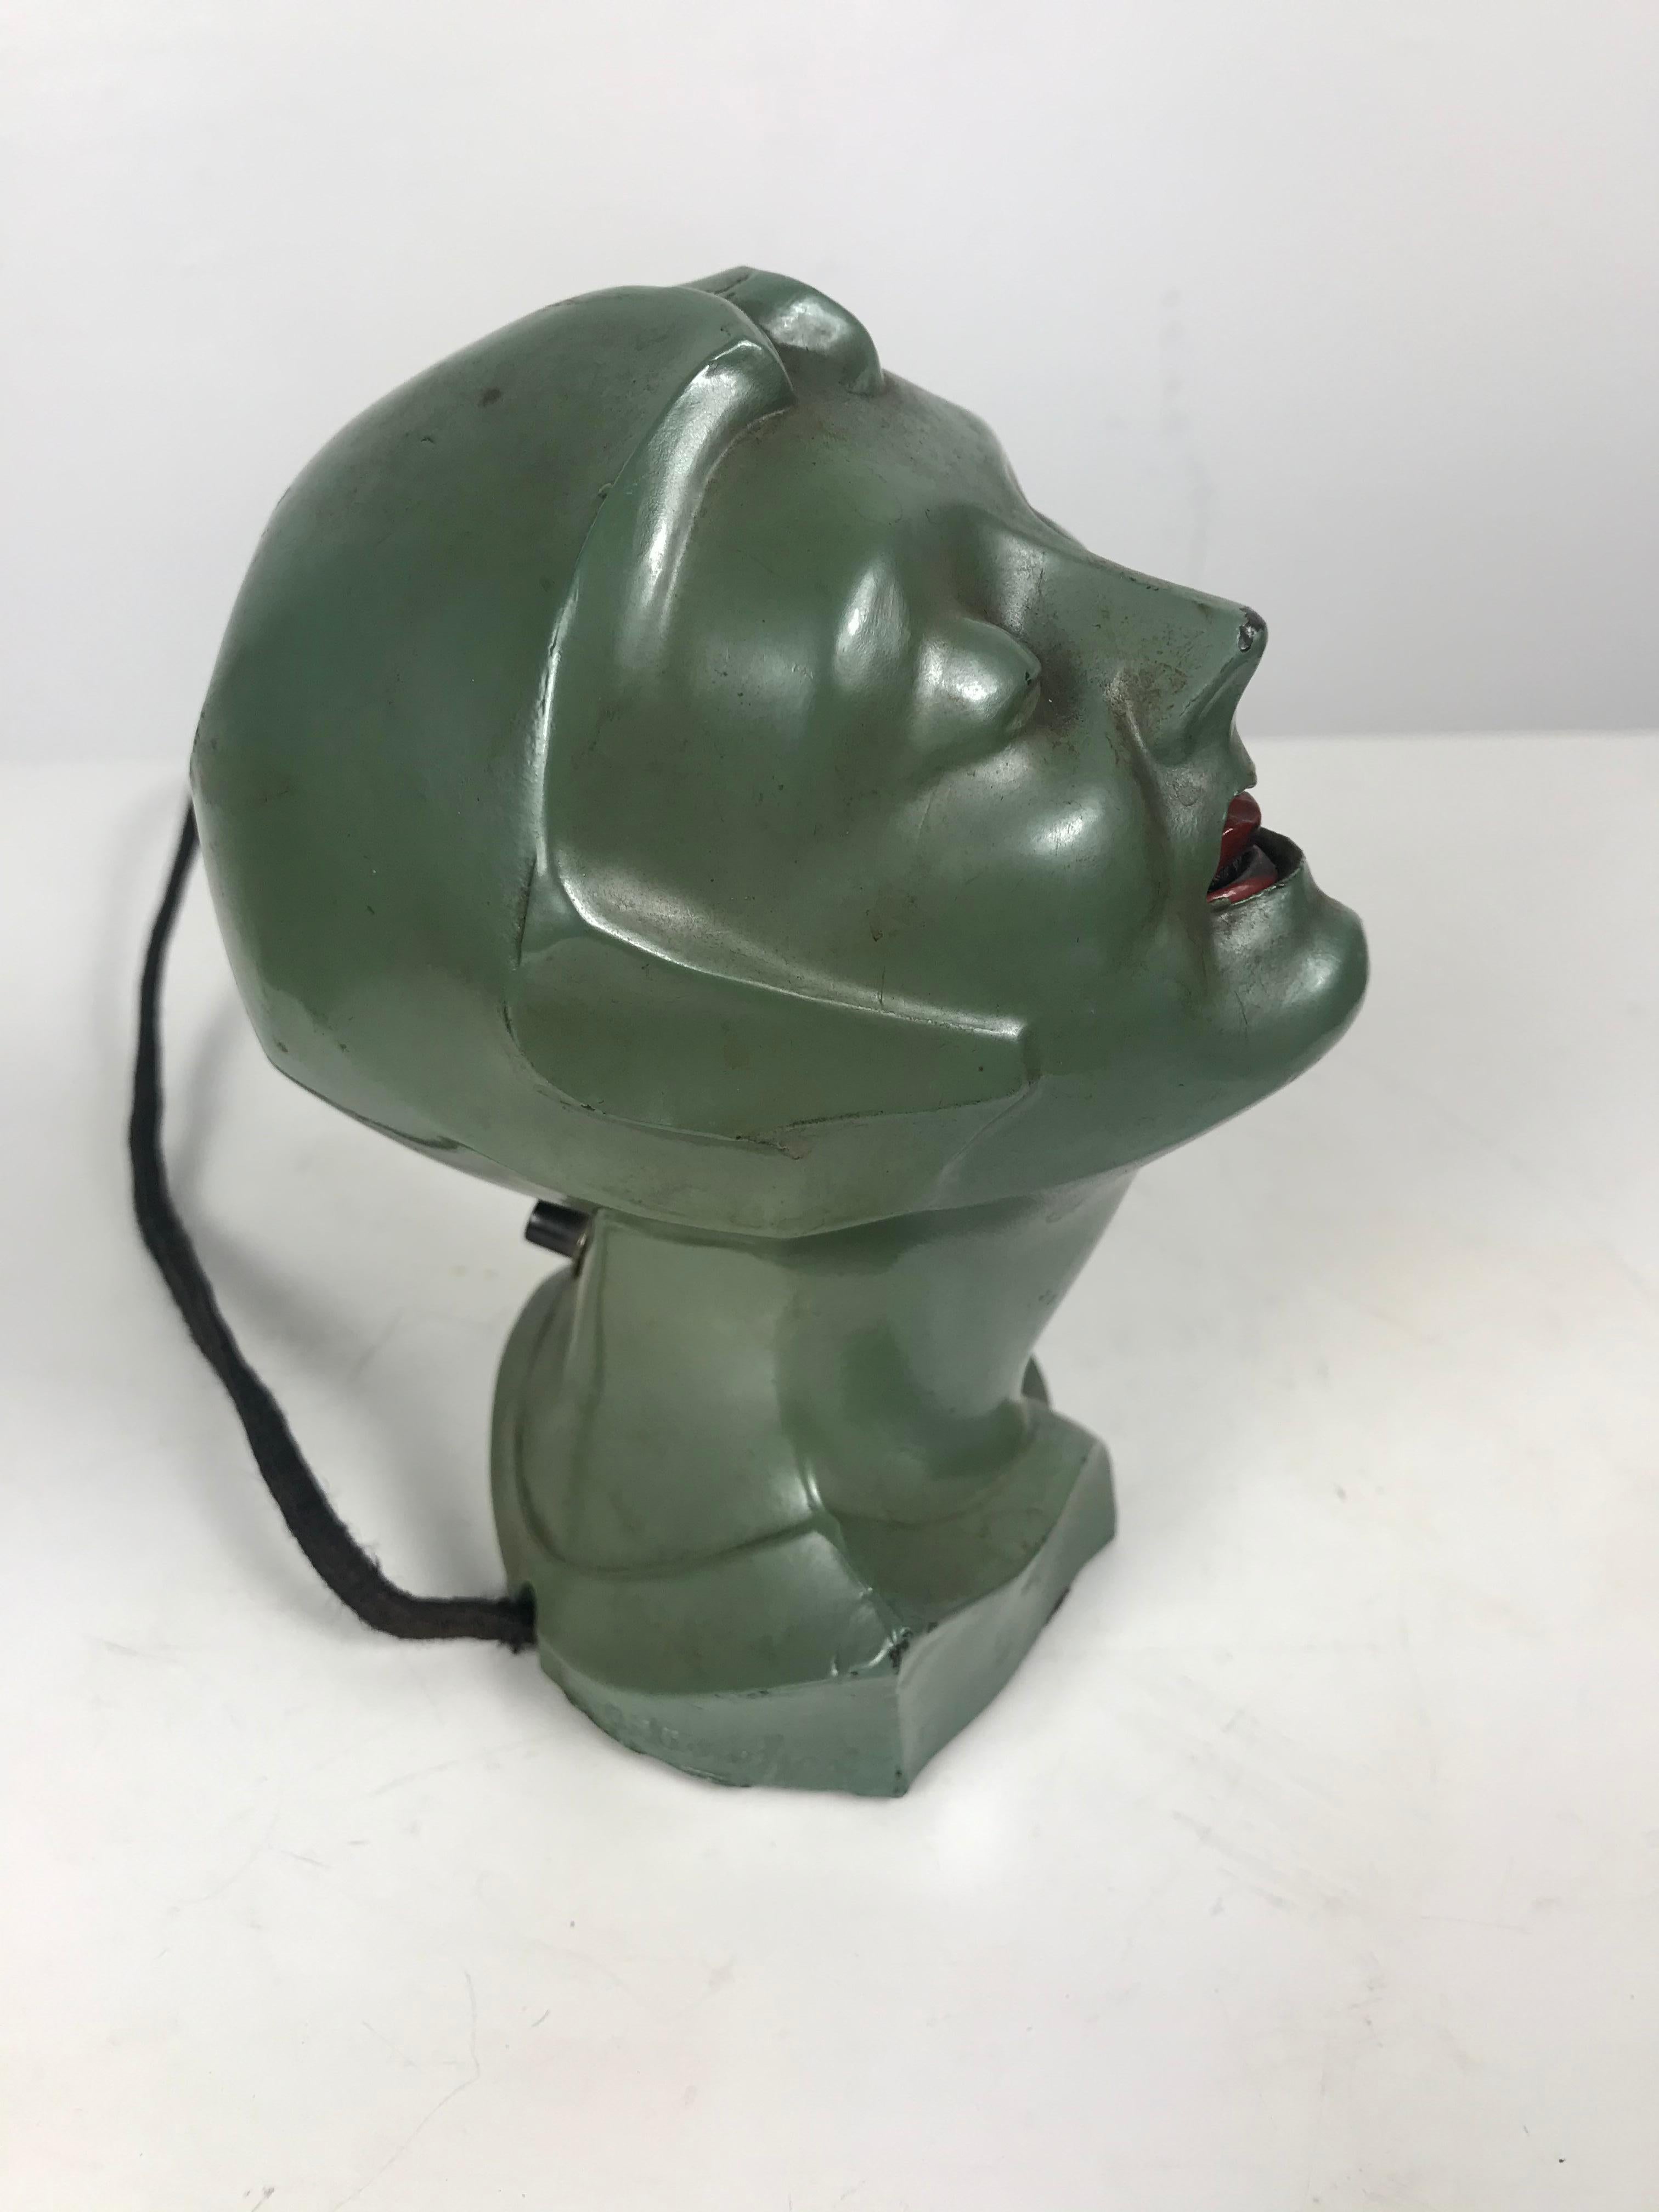 Stylized 1930s Art Deco women's head electric cigarette lighter by Arturo Levi. Retains original paint, finish, as well as original electrical plug and push button that heats up coil in women's mouth. Minor dent and paint loss to back of head,